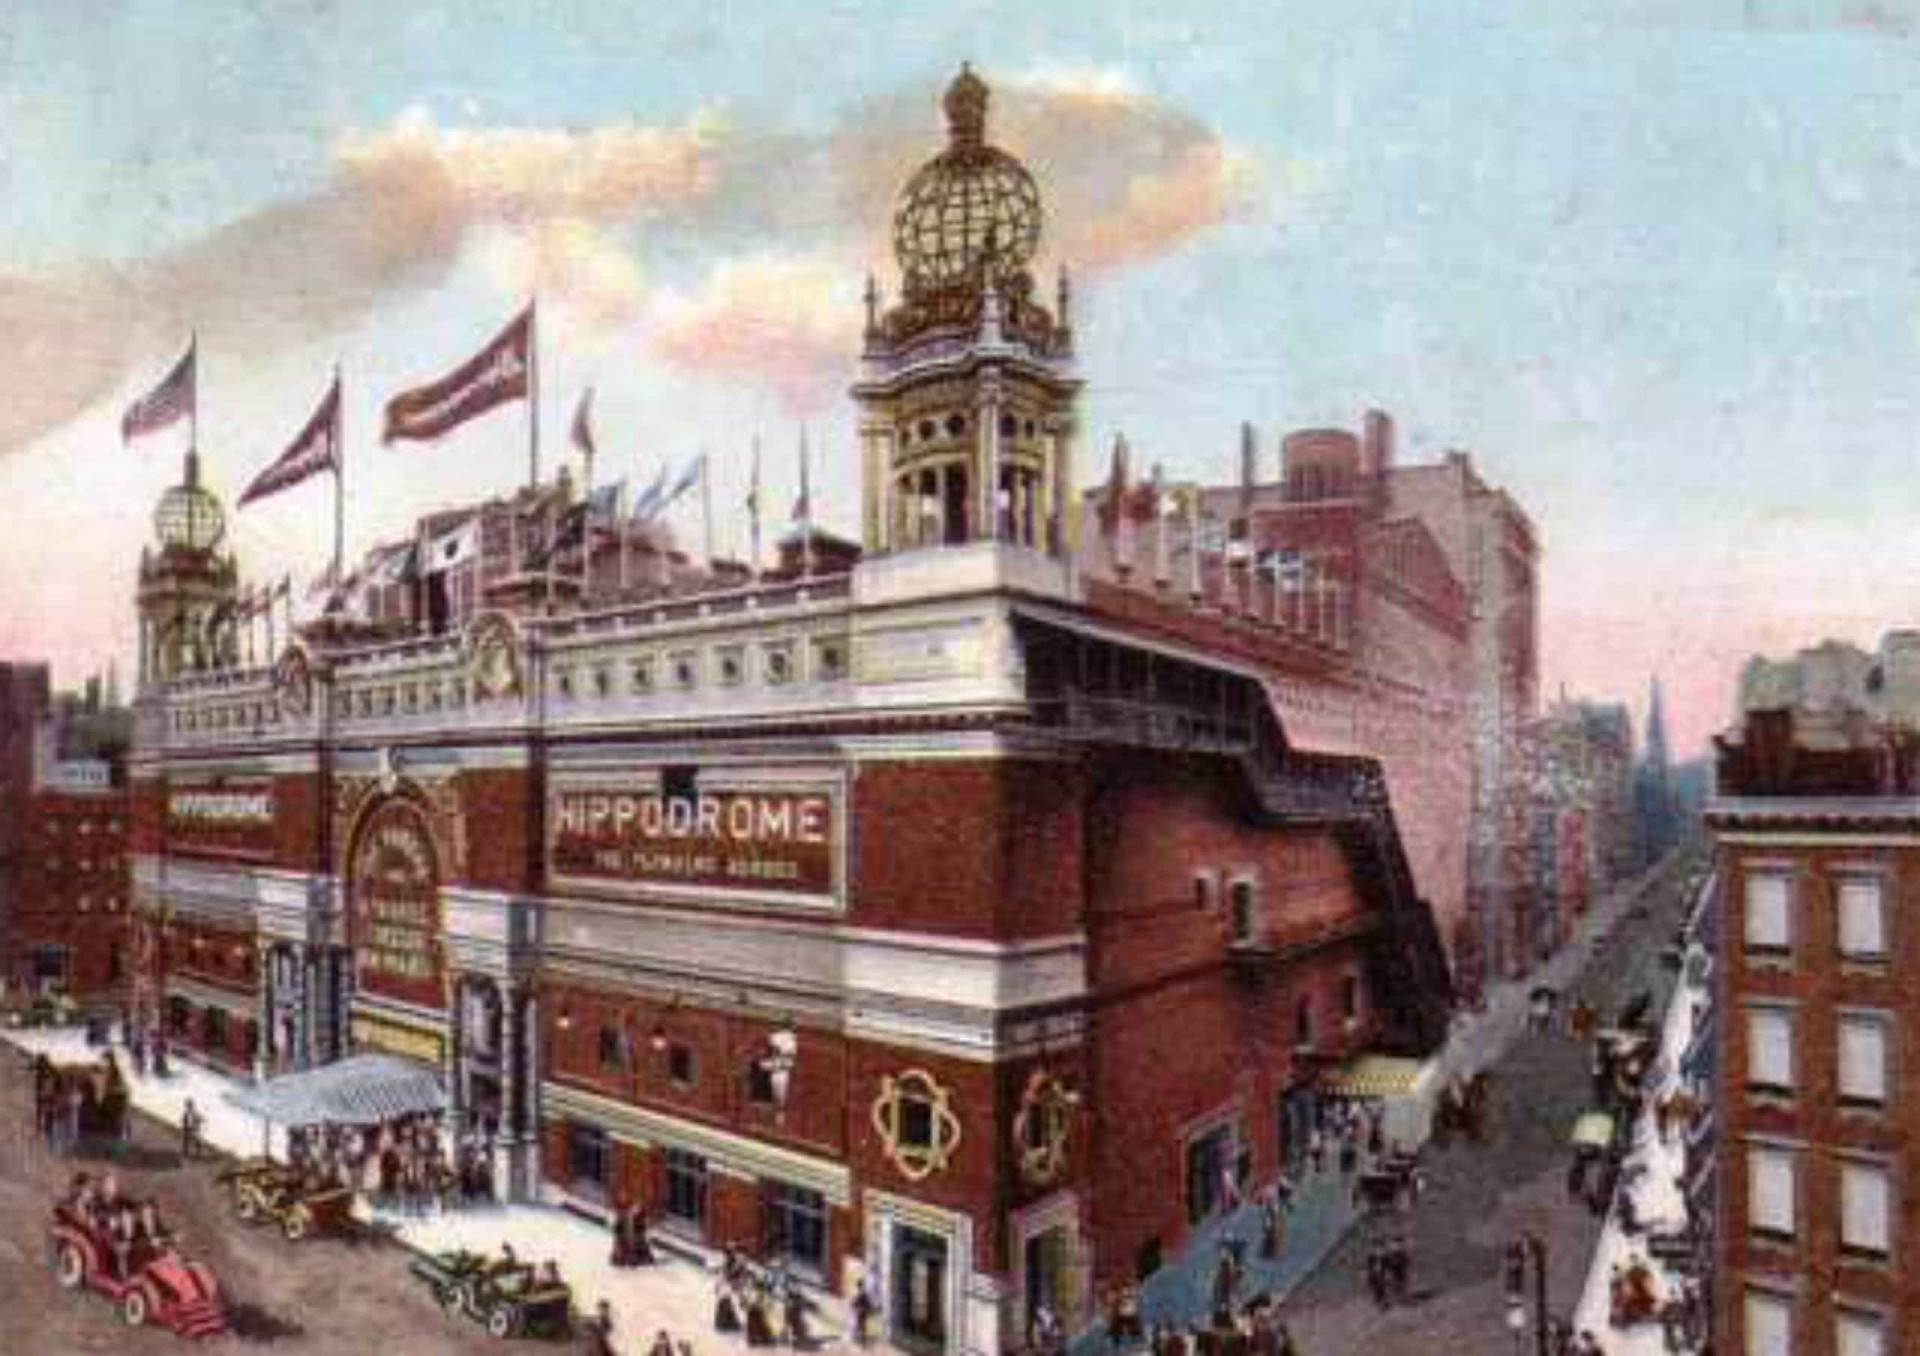 <p>When it opened in midtown Manhattan in 1905, the New York Hippodrome was billed as the largest theater in the world. It later became a movie theater, then an opera house, and finally a sports arena. The Great Depression finished it off, and it was torn down in 1939 to make way for an office complex. </p><p>You may also like:<a href="https://www.starsinsider.com/n/477749?utm_source=msn.com&utm_medium=display&utm_campaign=referral_description&utm_content=668561en-my"> The Queen Mother, the most graceful of royals</a></p>